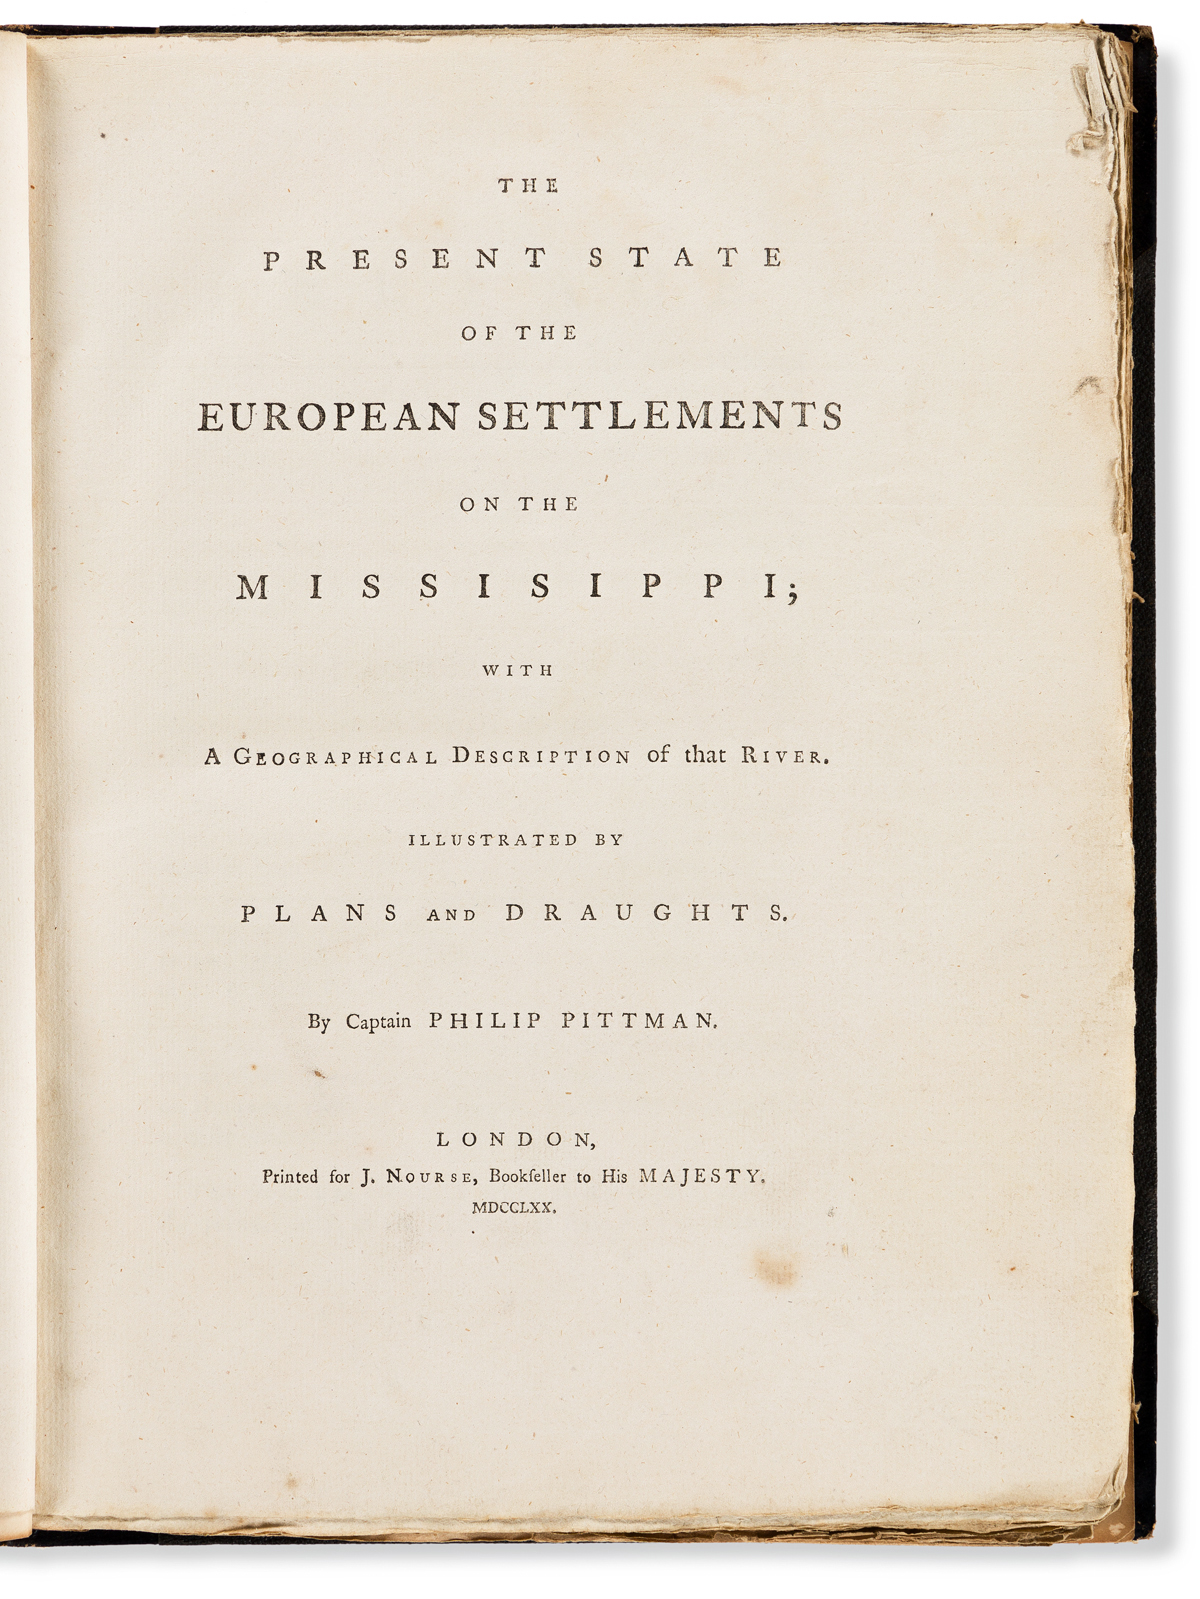 Pittman, Philip (fl. circa 1765) The Present State of the European Settlements on the Missisippi [sic] with a Geographical Description